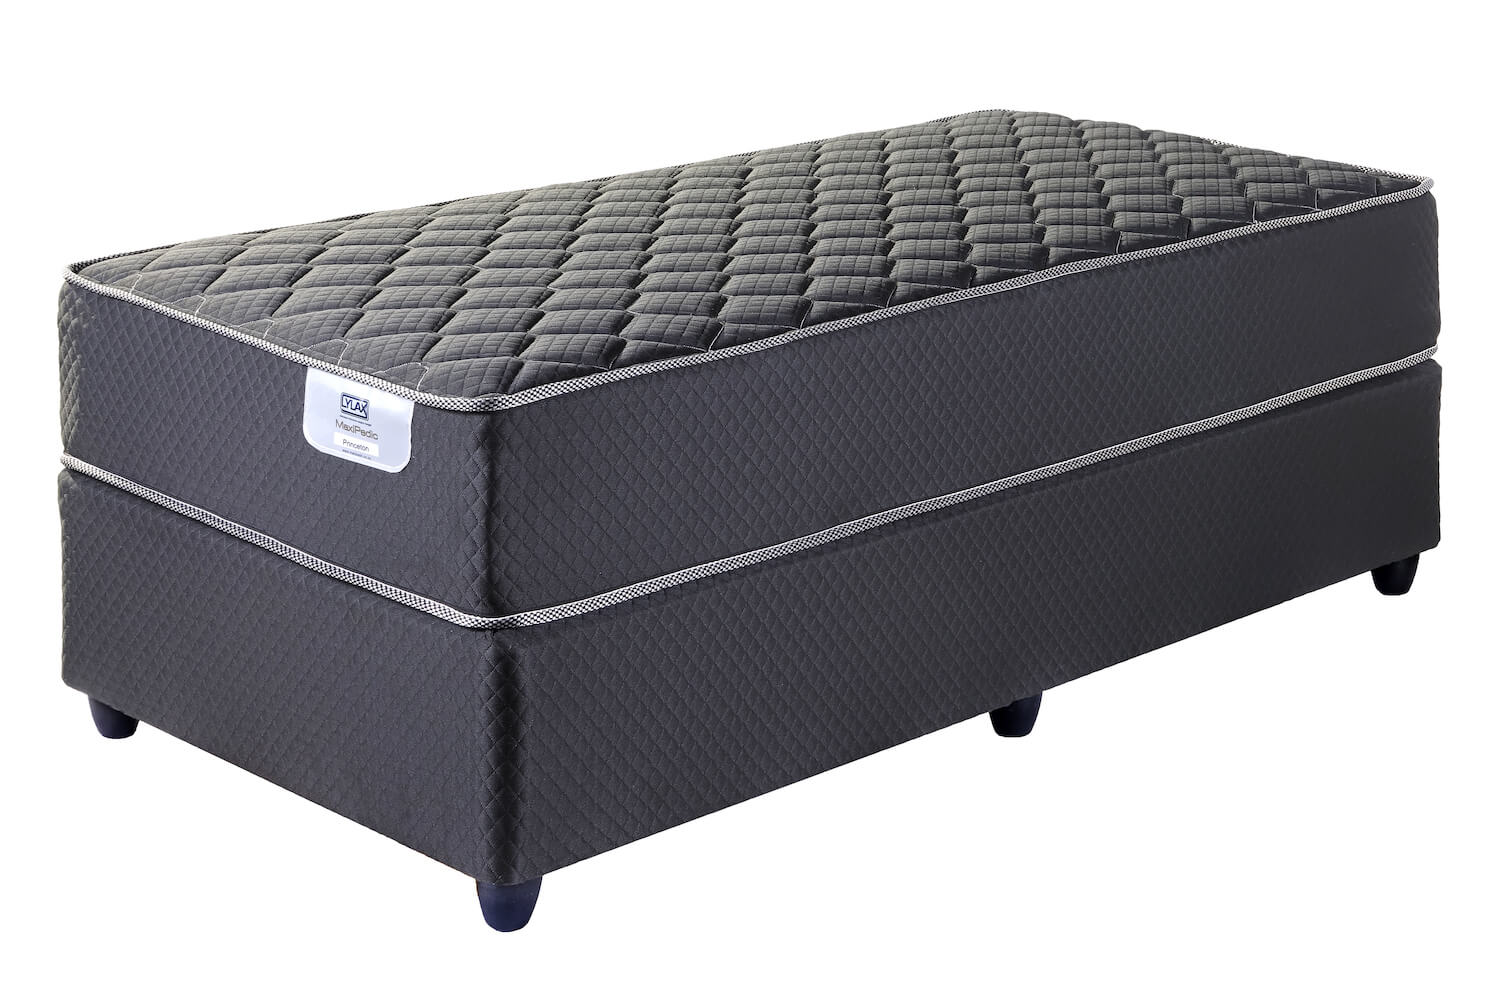 Lylax Maxipedic Performer Double Sided